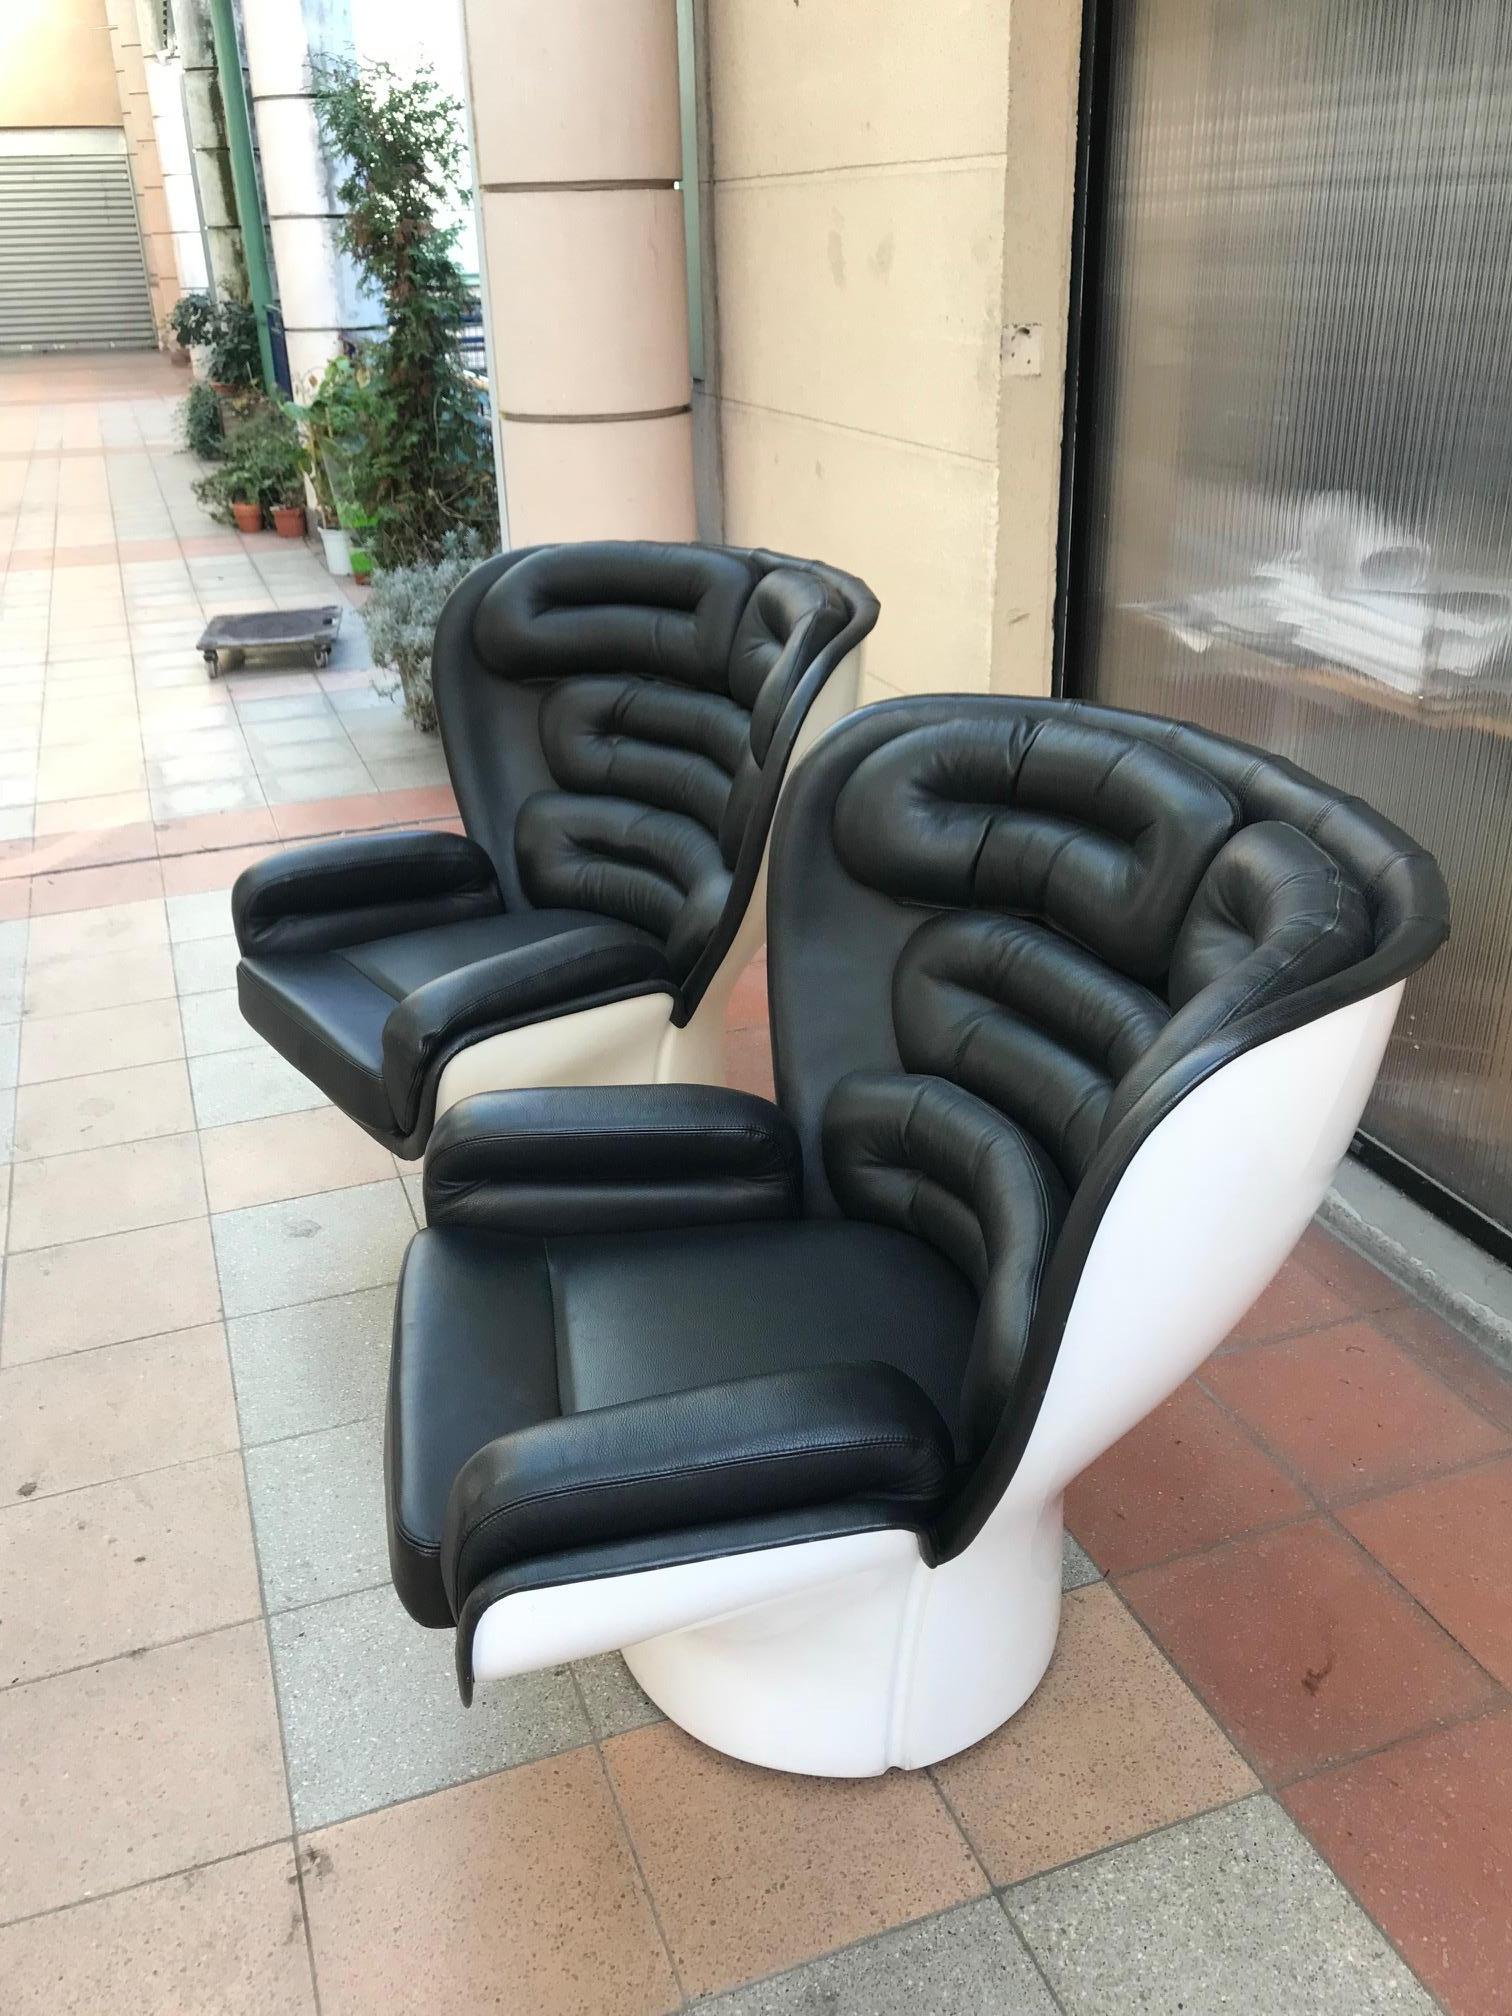 Pair of Elda armchairs by Joe Colombo
Longhi edition
Black leather, white shell.